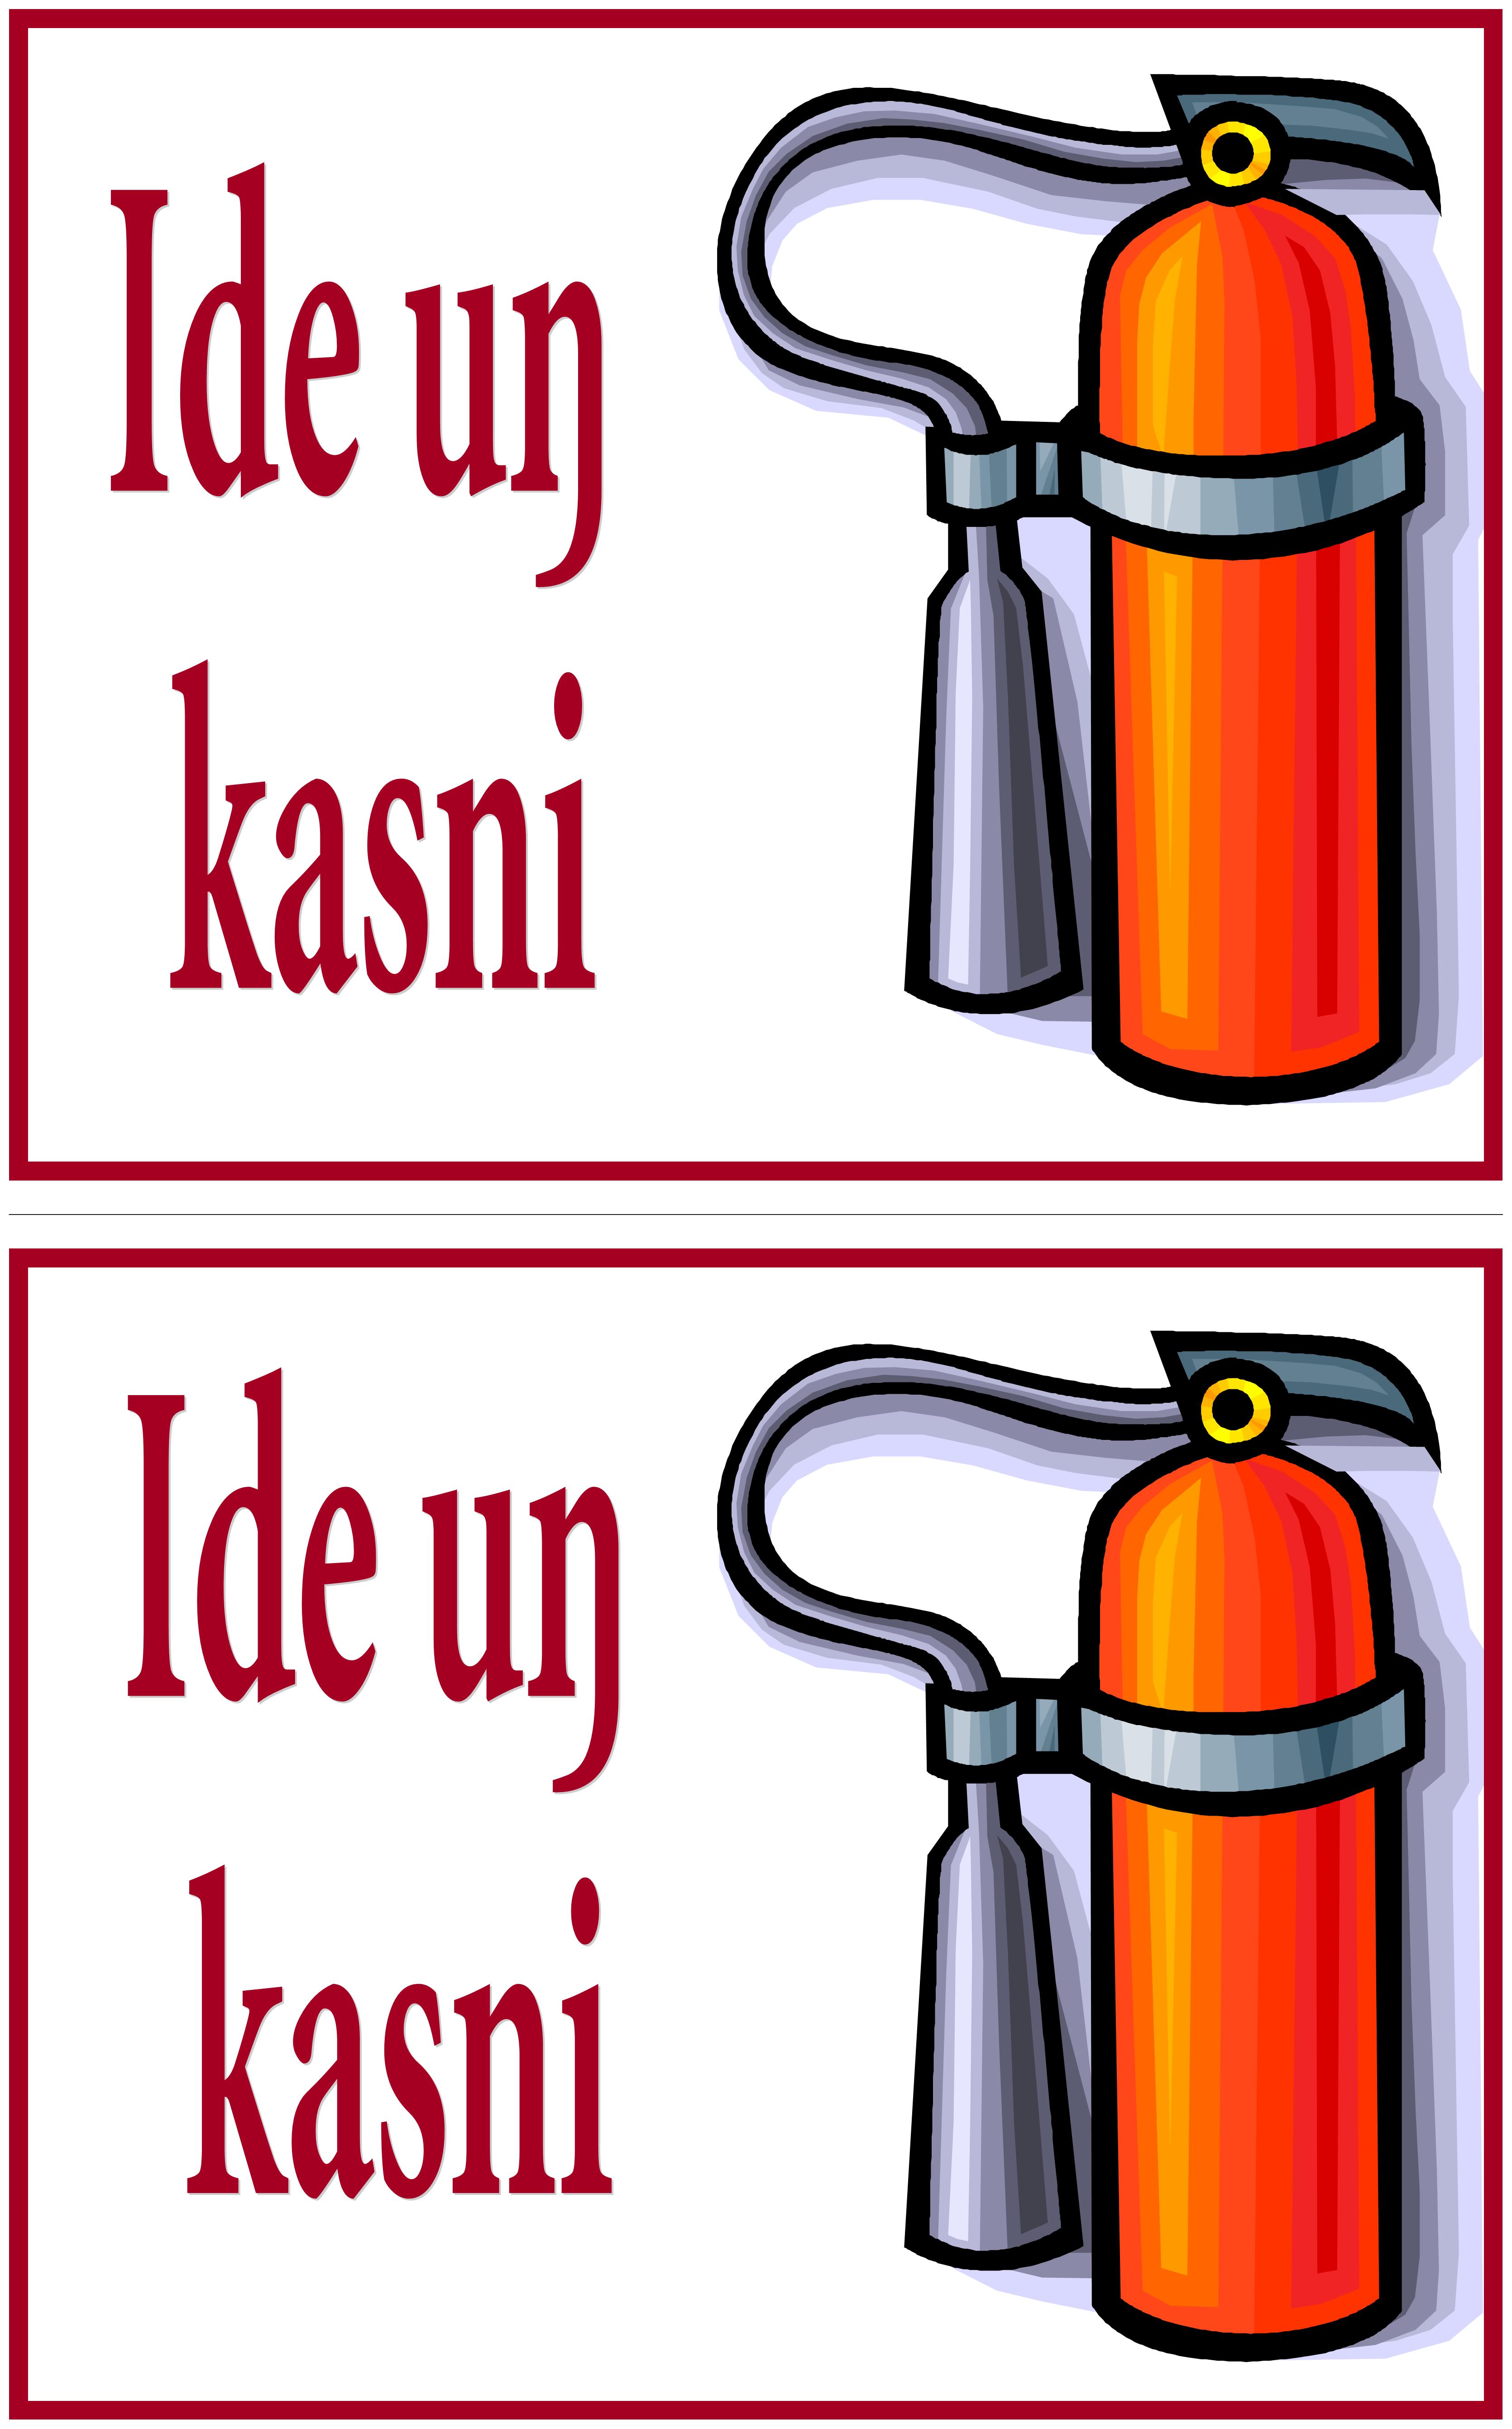 fire inspection clipart - photo #46